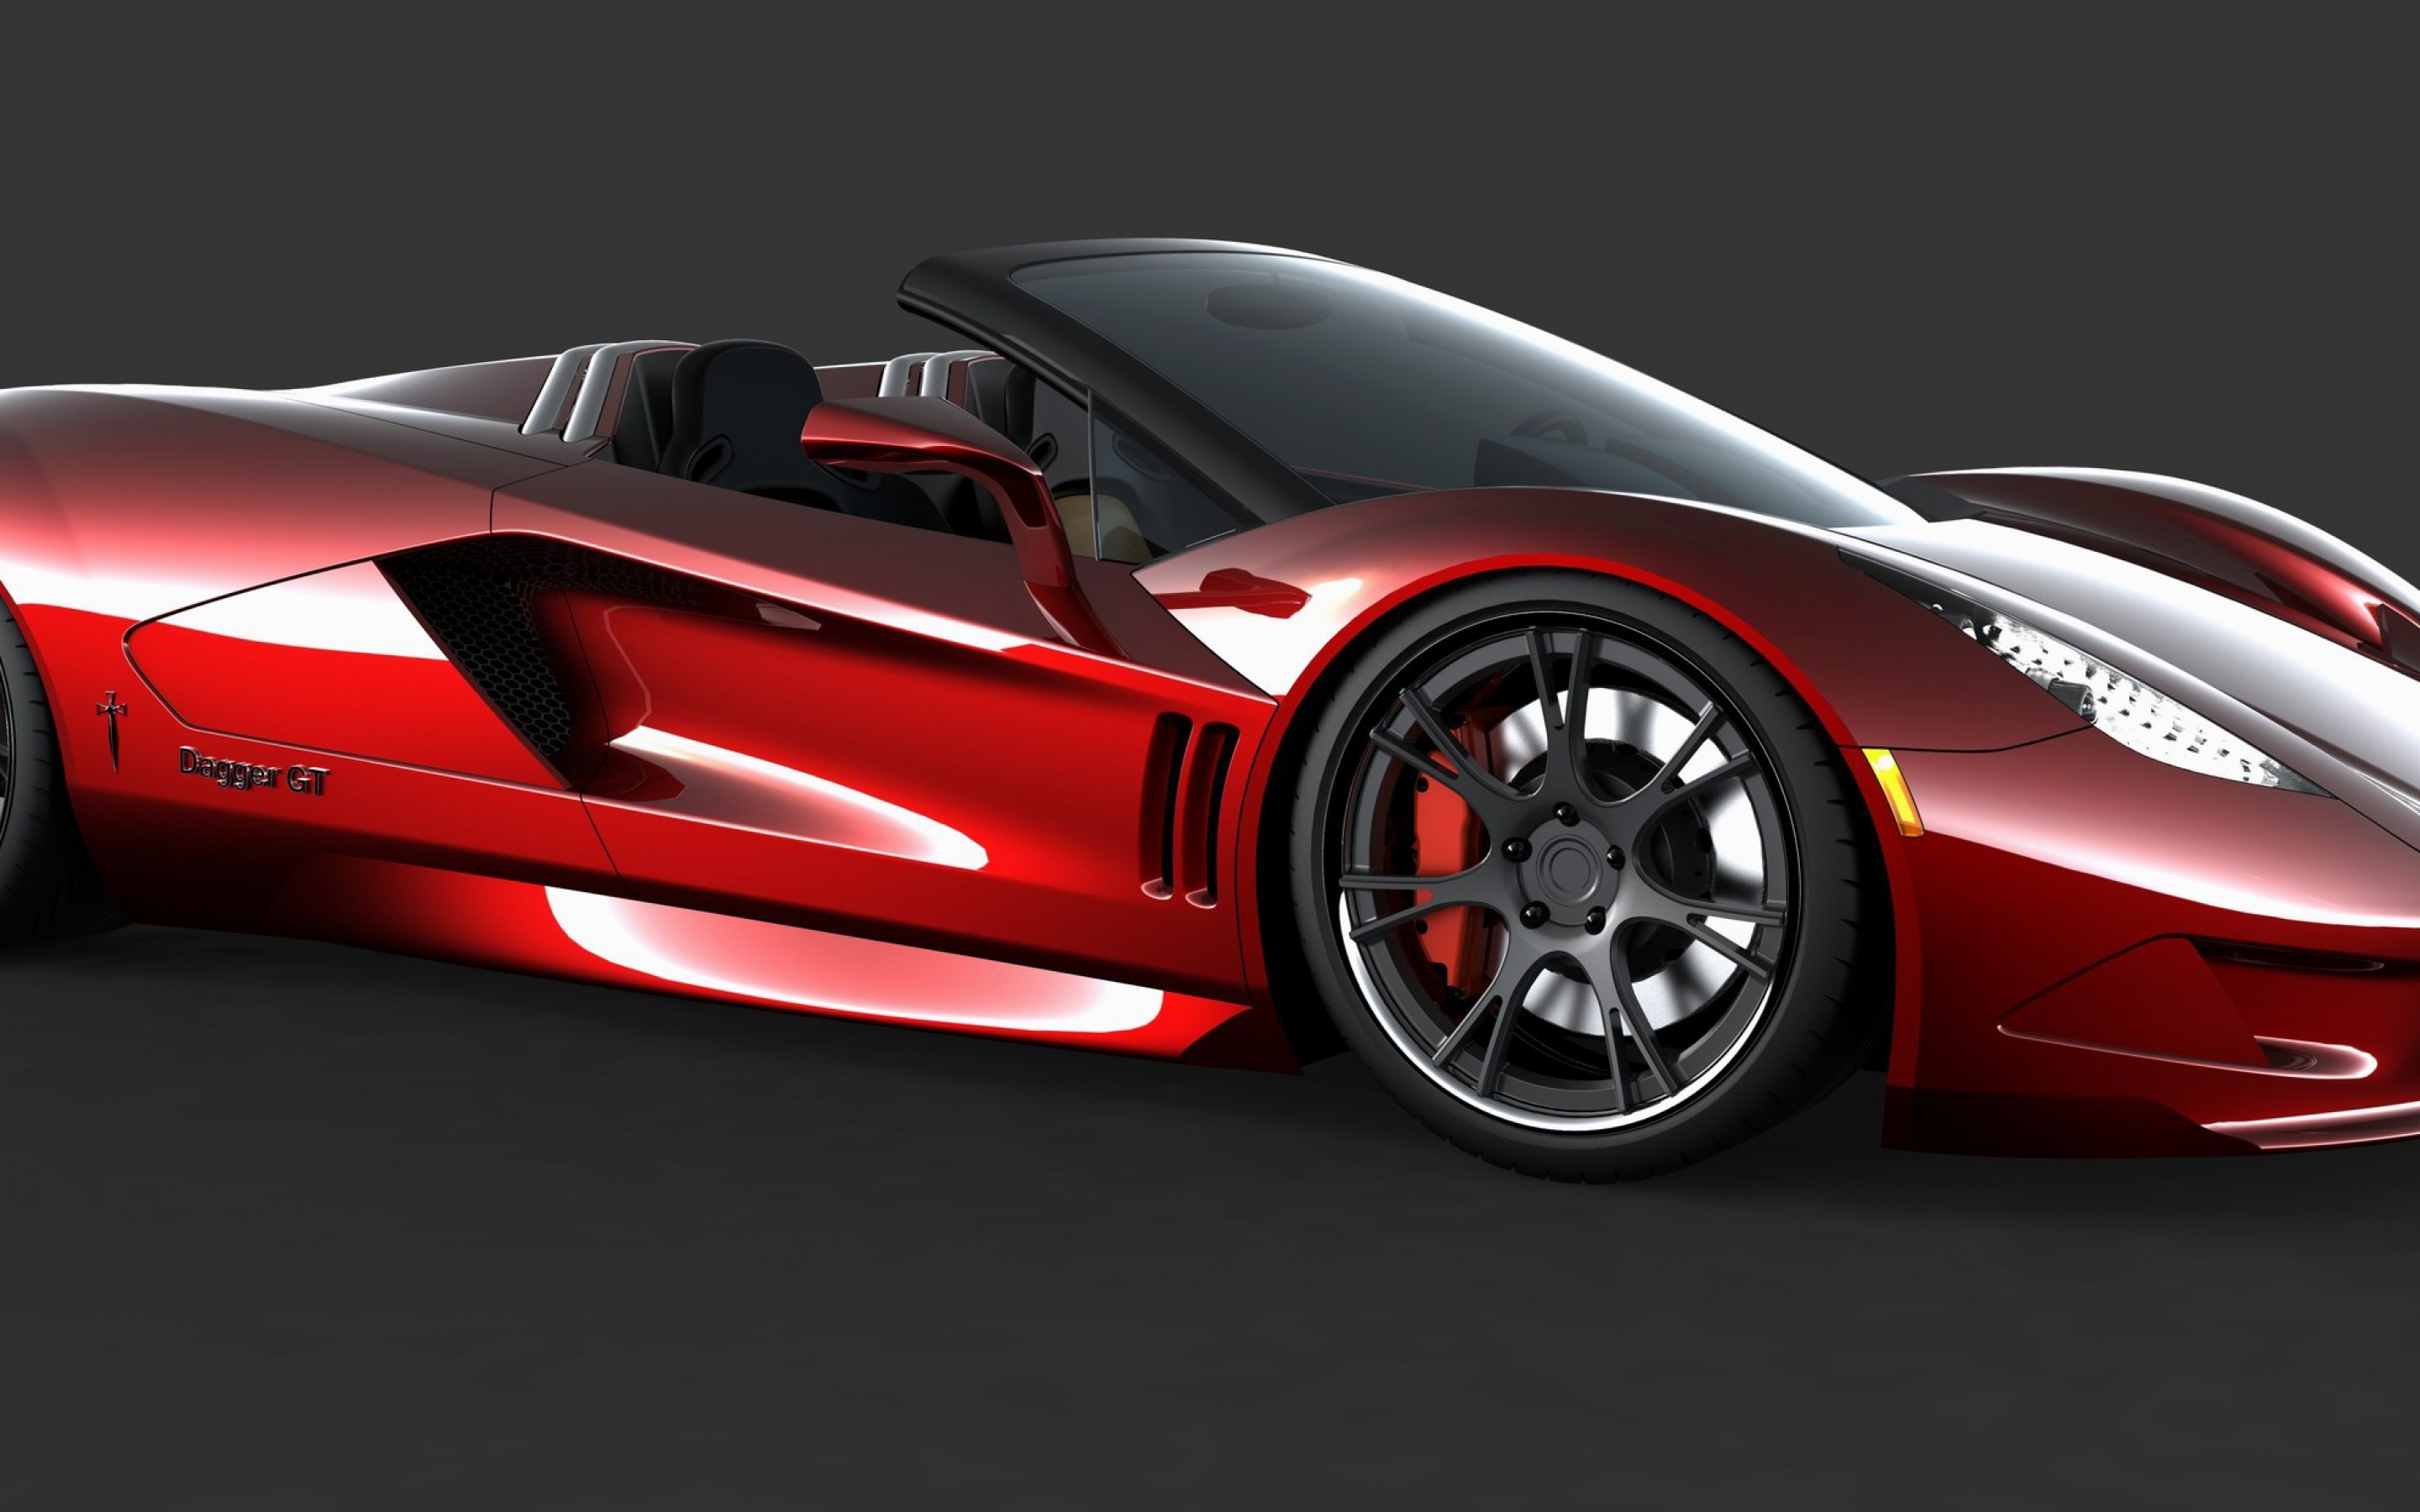 2880x1800 ... Free Images Of Cars Lovely Racing Car Wallpapers Free Download 16 Free  Wallpaper ...